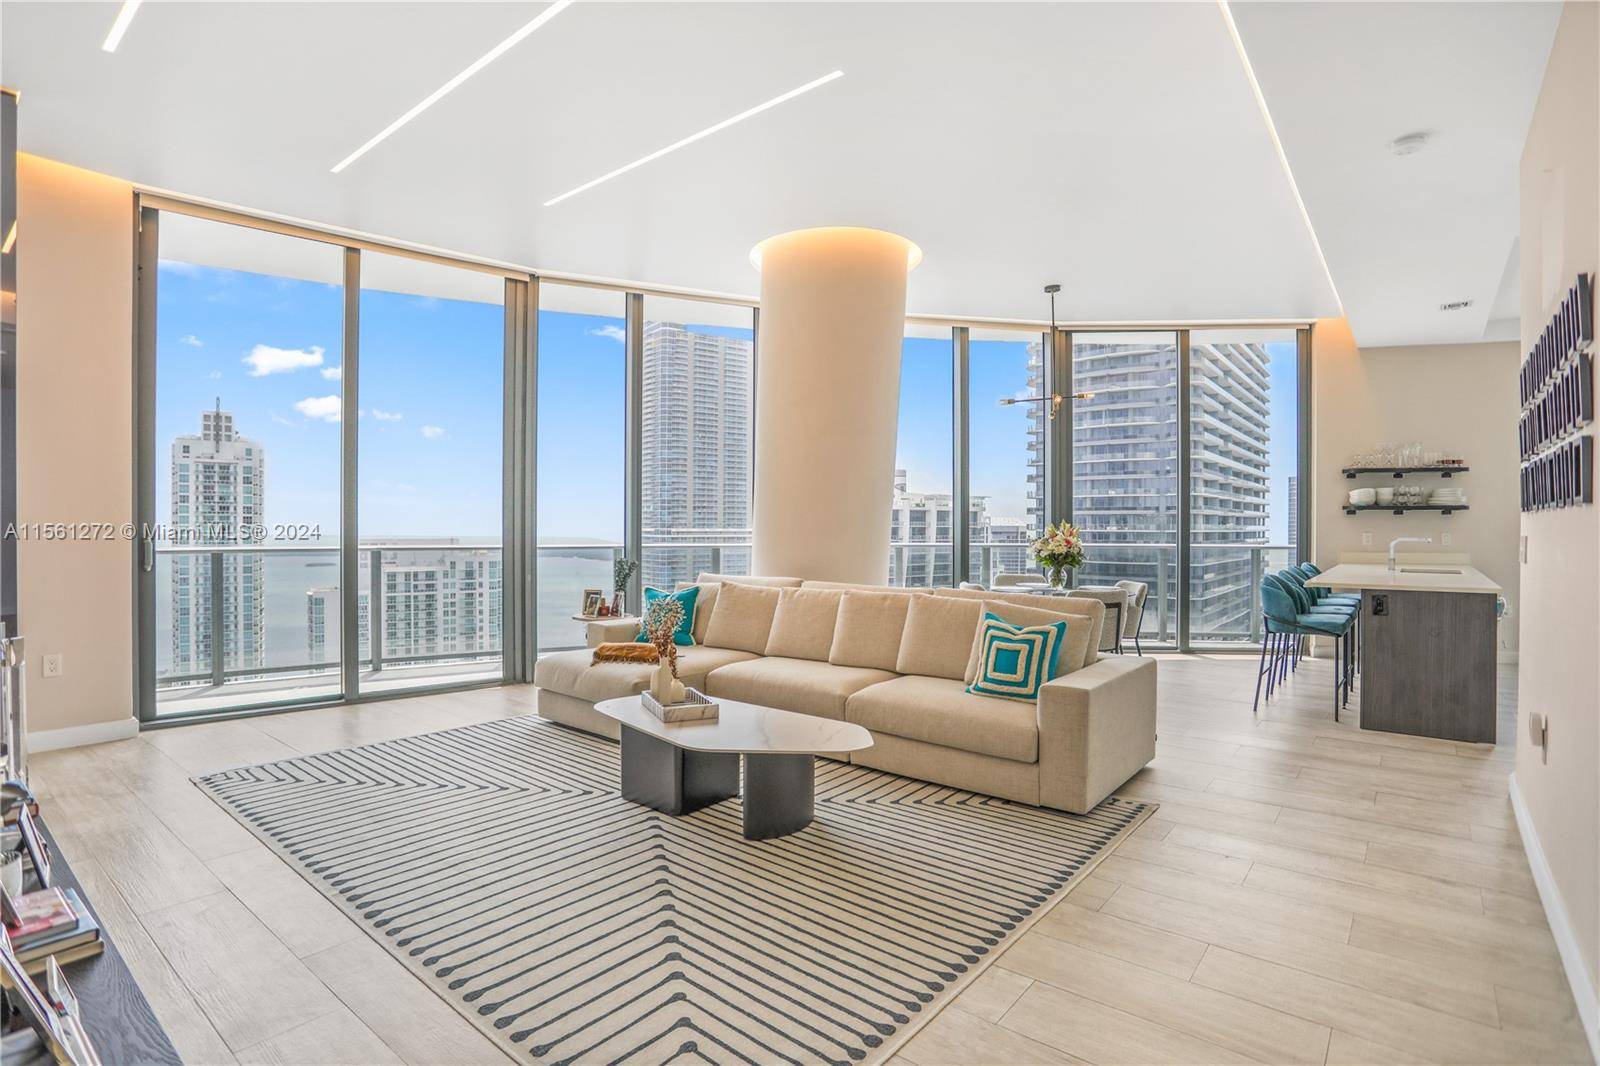 Experience luxury living in this Lower Penthouse Unit located in the heart of Brickell.